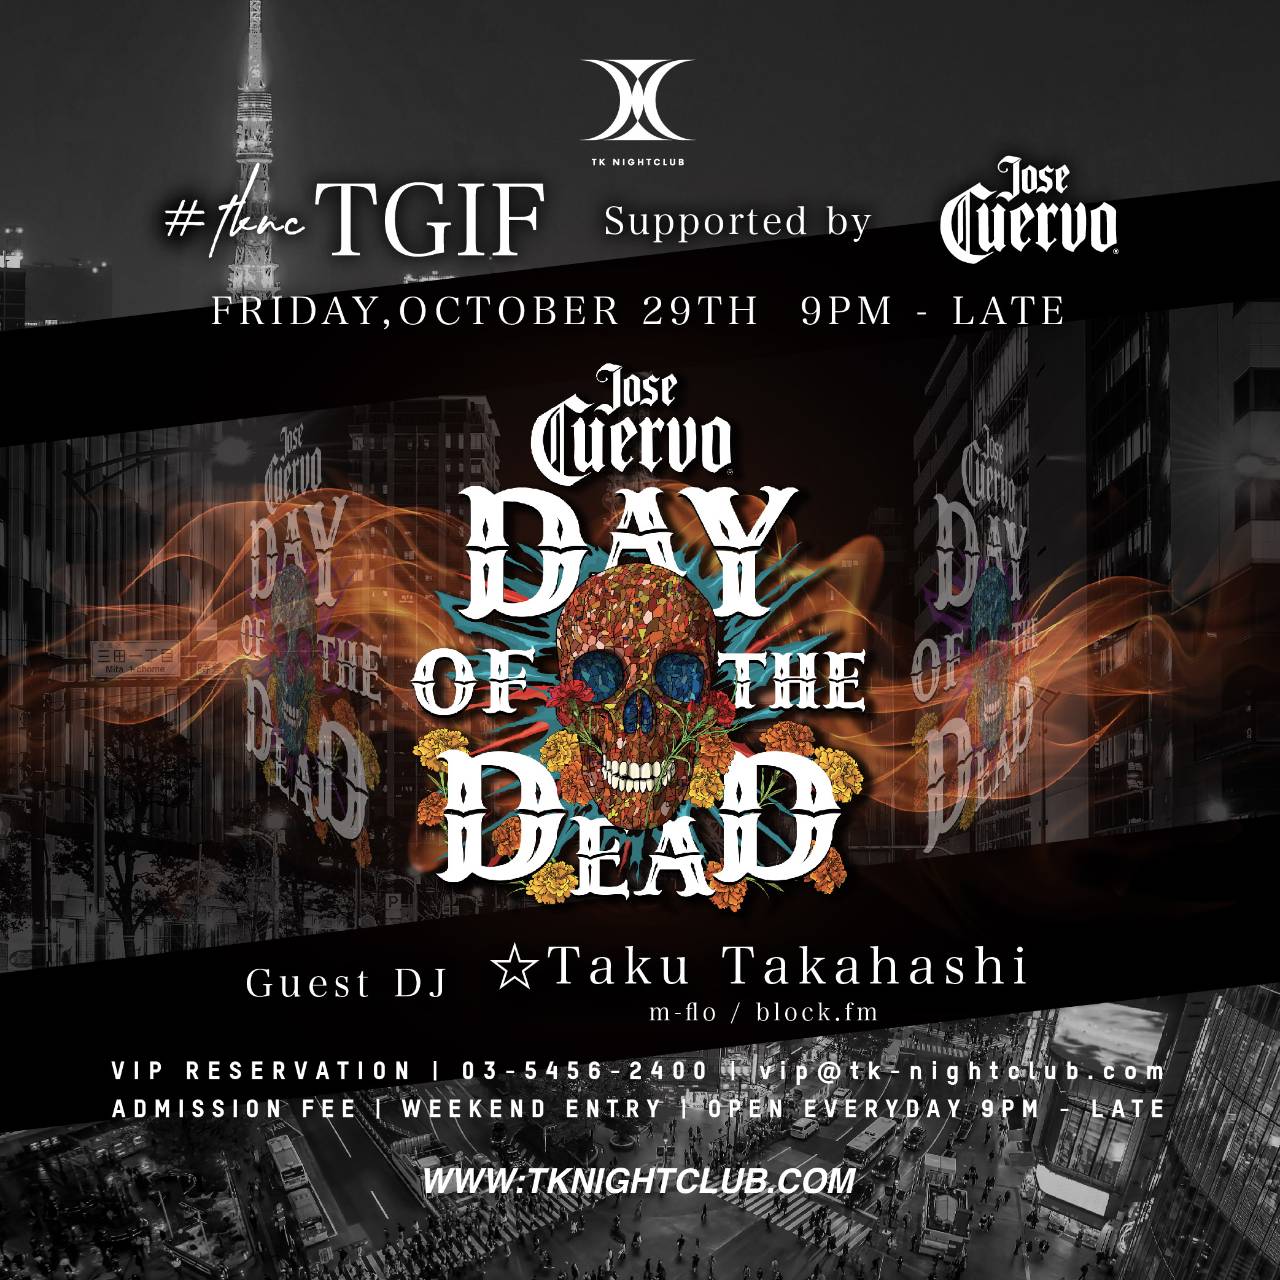 TKNC,s TGIF DAY OF THE DEAD Supported by Jose Cuervo